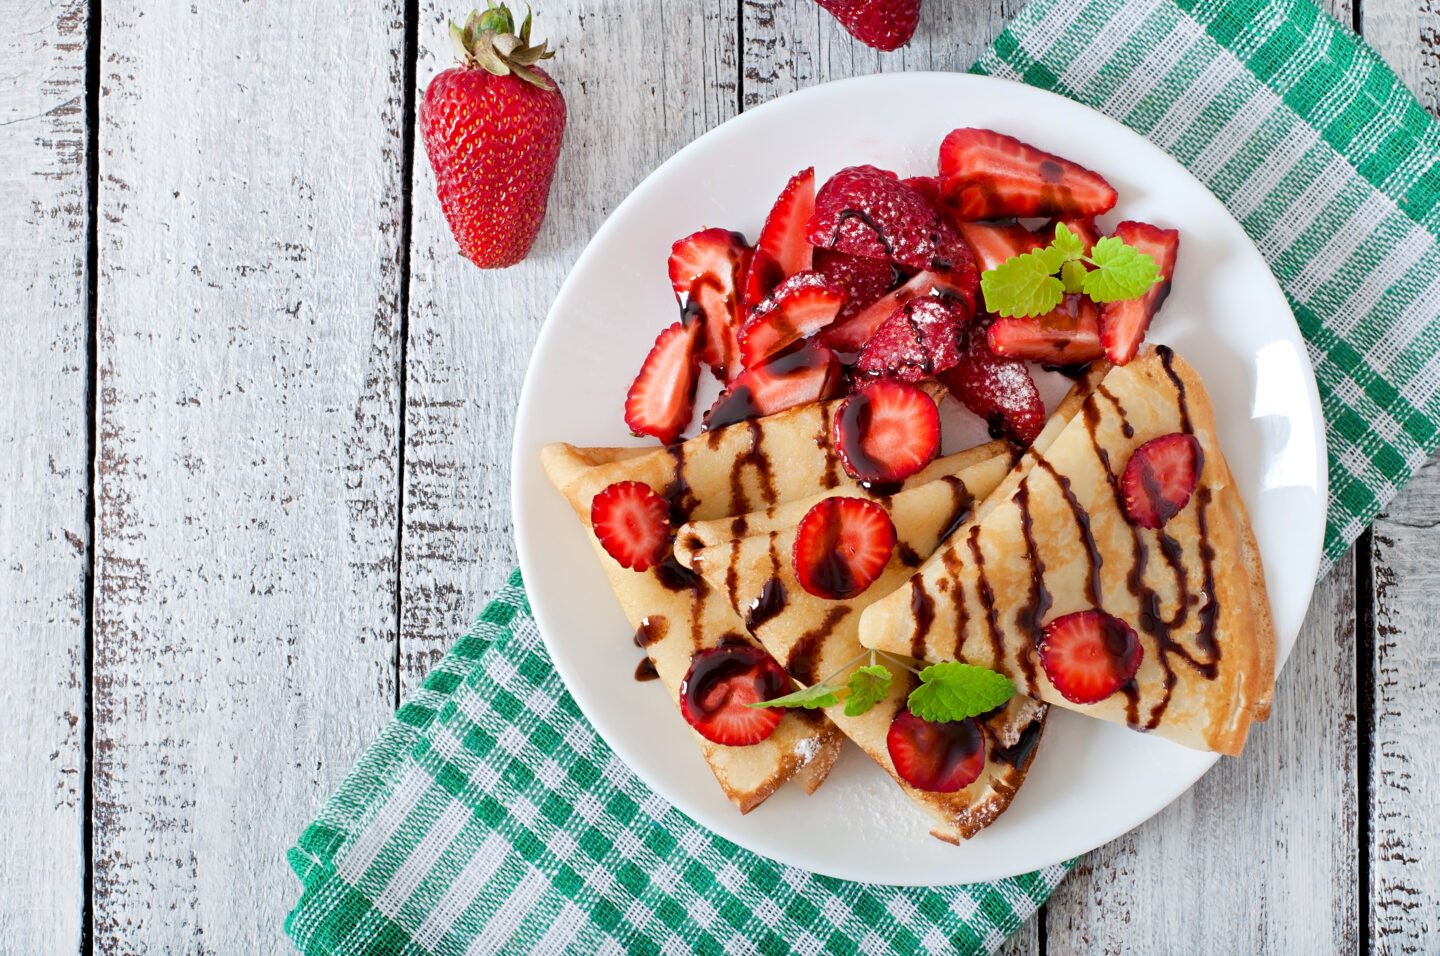 Pancakes,With,Strawberries,And,Chocolate,Decorated,With,Mint,Leaf.,Top